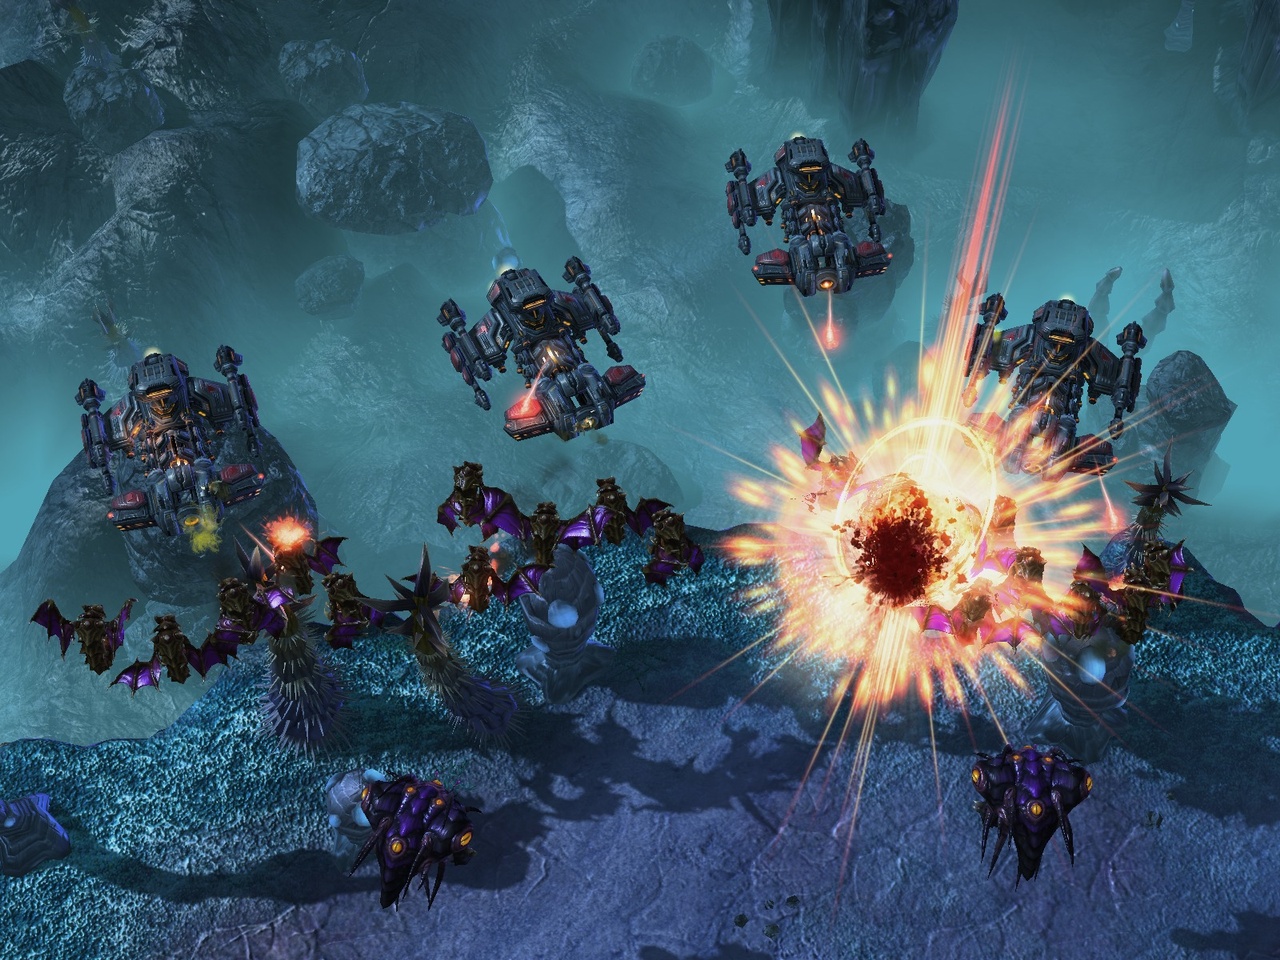 nirvAna believes that a new player's mistake stems from their lack of understanding of Starcraft II's mechanical and strategic theories.